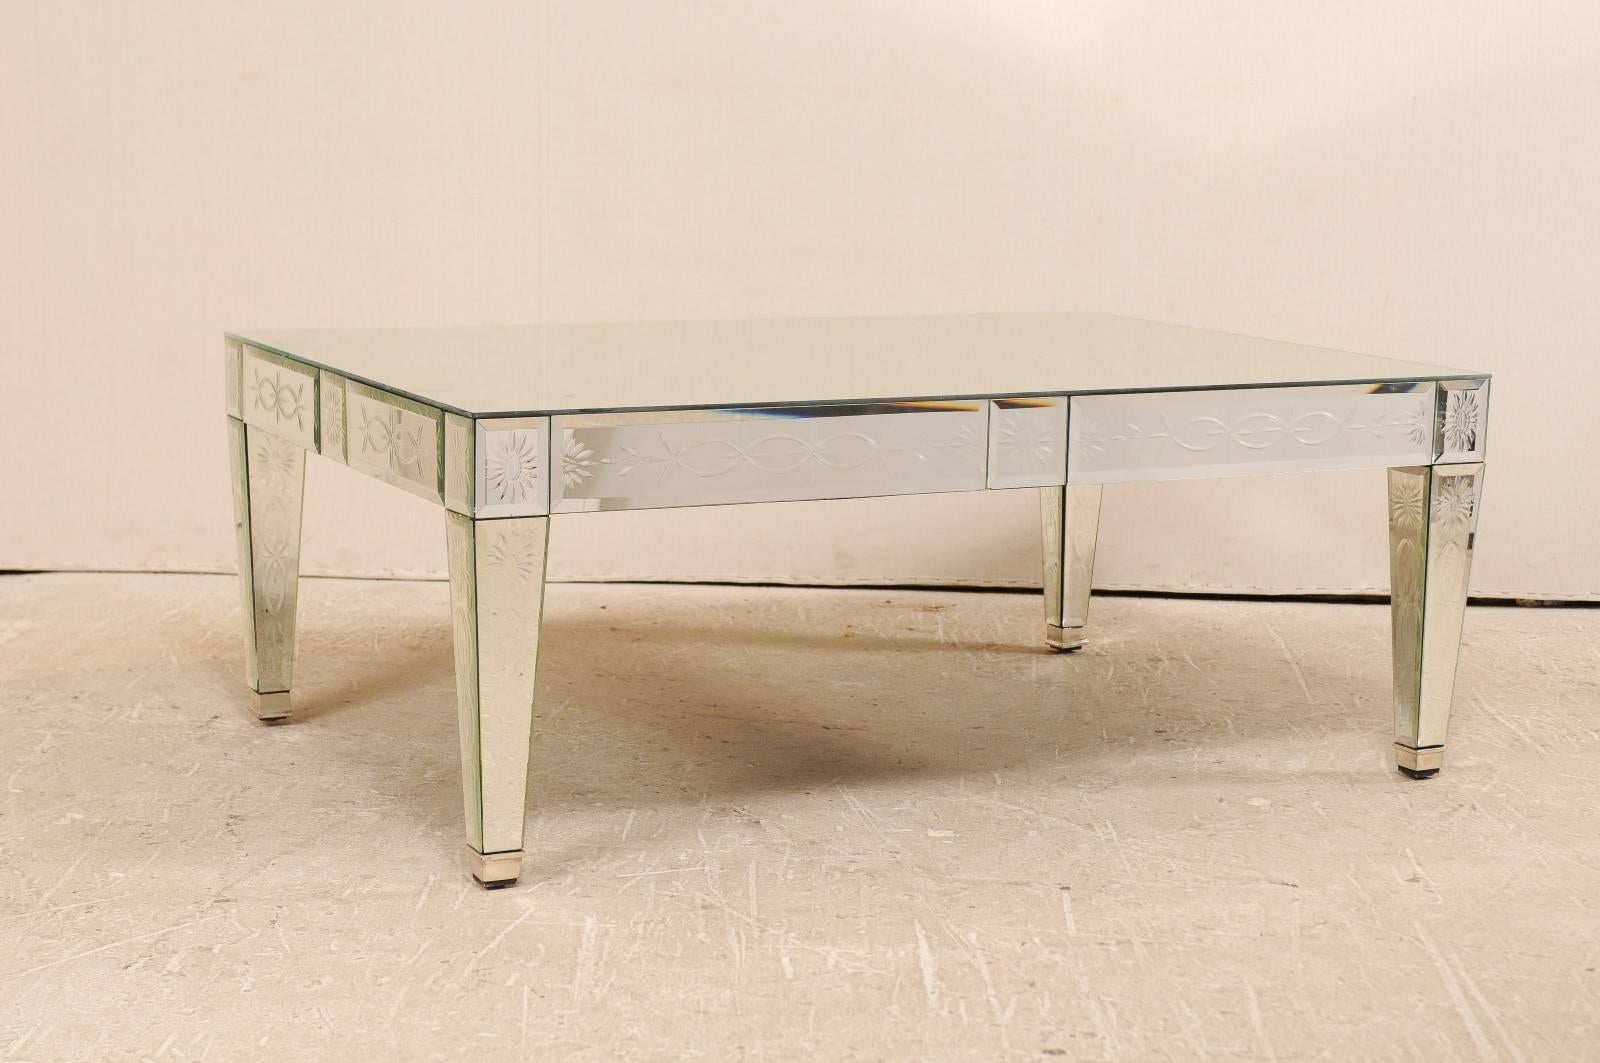 A vintage Venetian style mirror coffee table. This American handmade and hand silvered mirrored coffee table from the late 20th century will add a bit of glamour to your home with its clean lines and refined etched motifs. This table has a mirrored